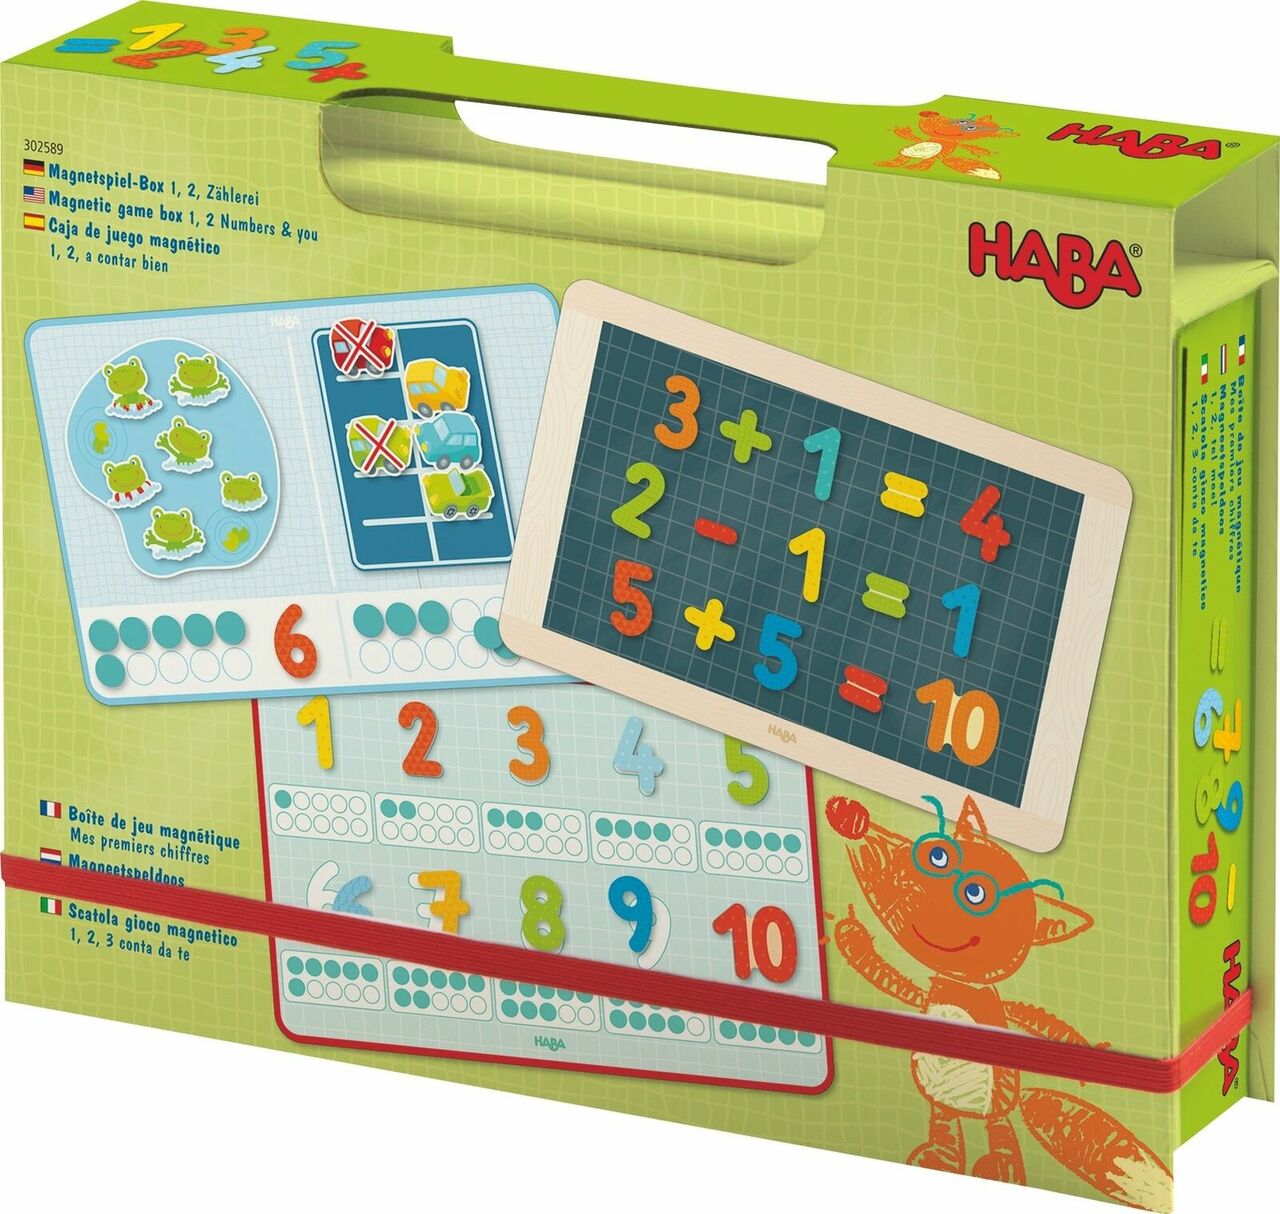 HABA 1,2 Numbers and You Magnetic 158 Piece Game Box